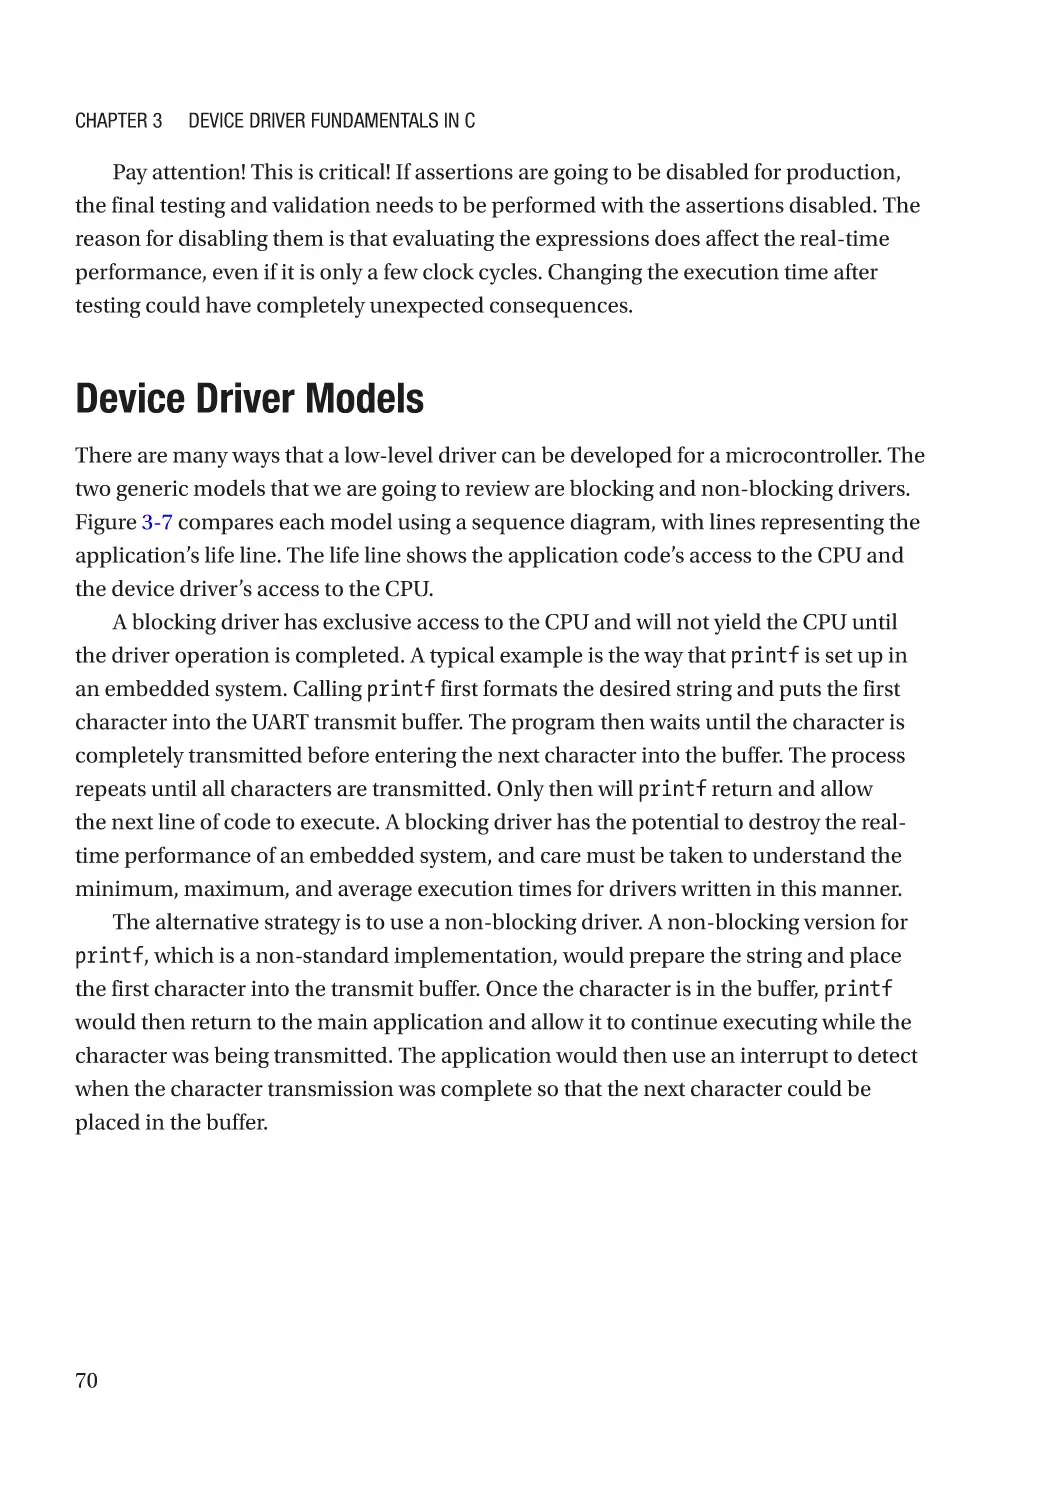 Device Driver Models